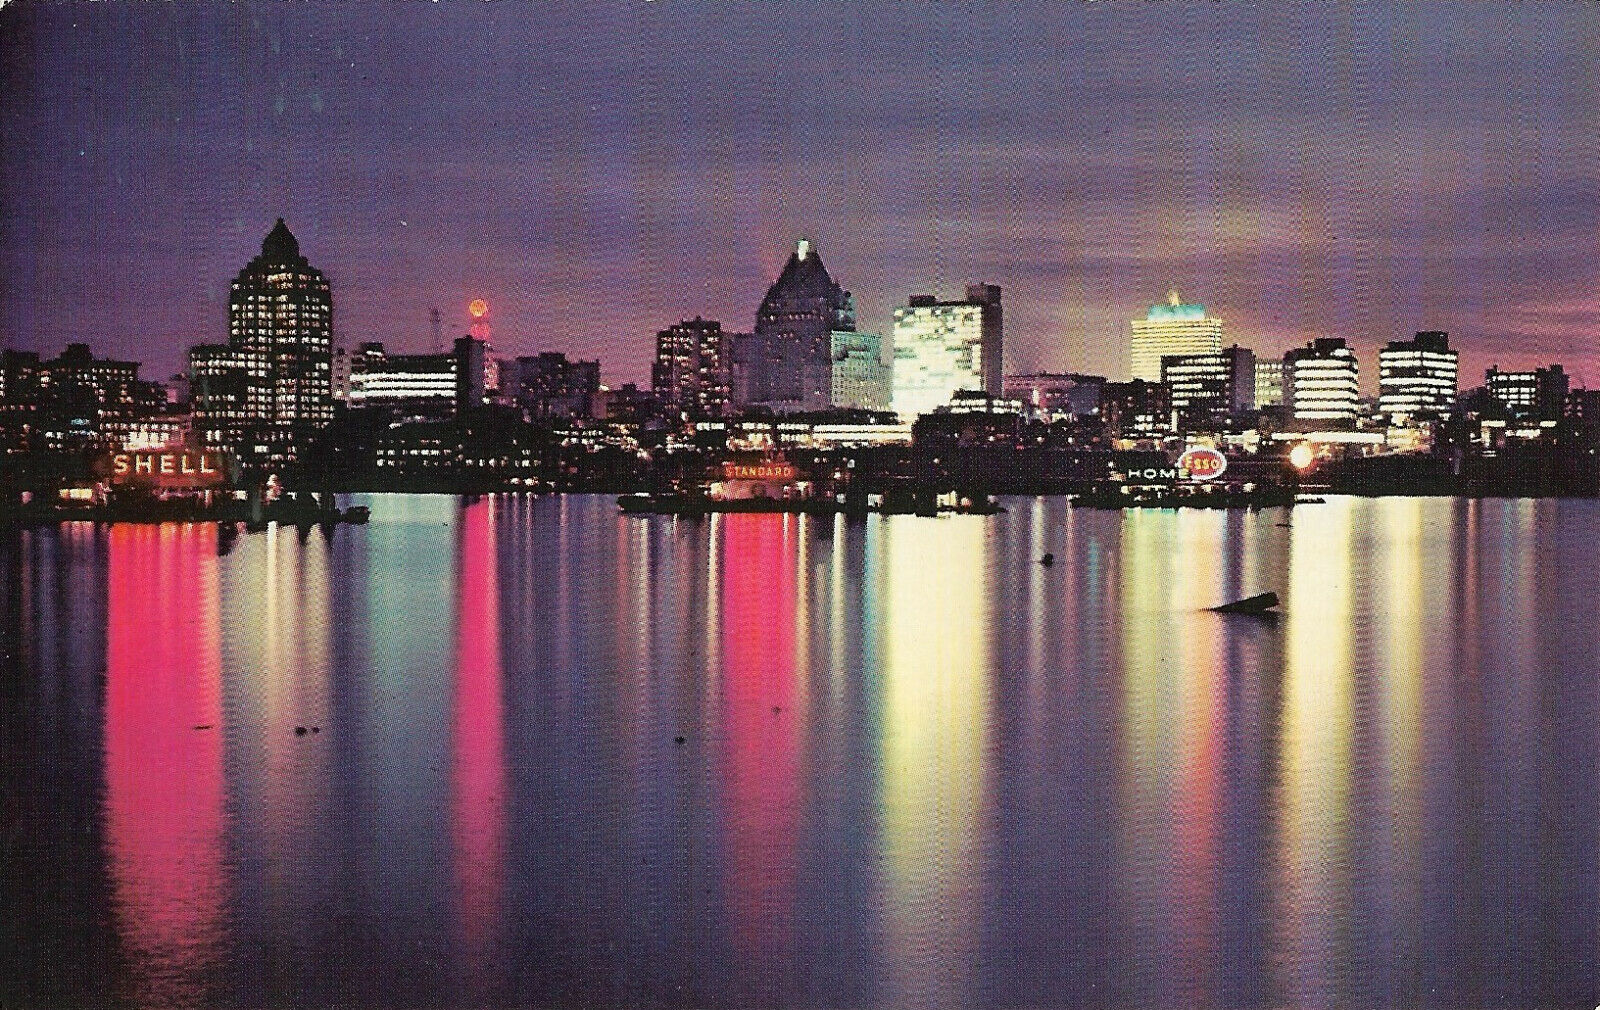 House Clearance - Canada - Vancouver - Skyline at night as seen from Stanley Park - circa 1970